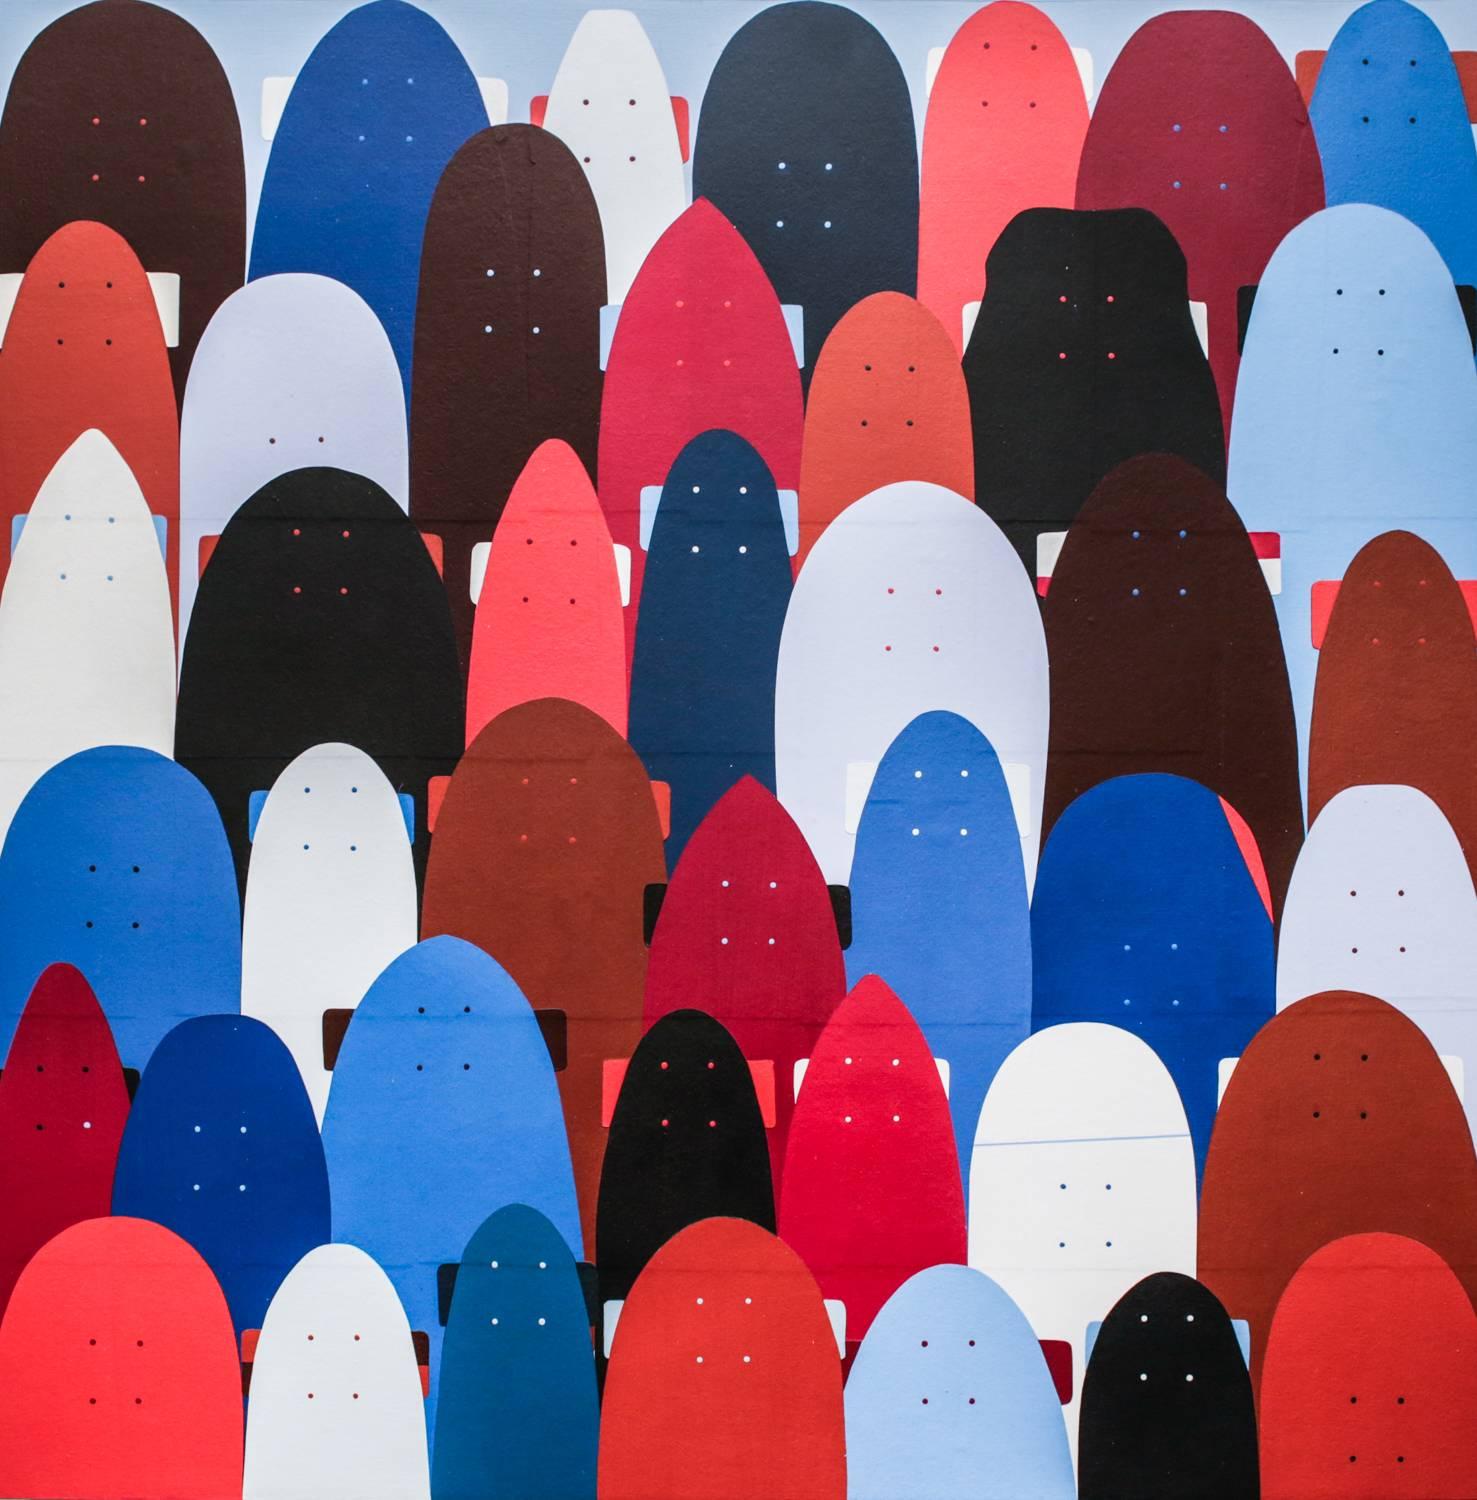 Jim Houser Abstract Painting - "THE LINE UP" Collage on panel, skateboard motifs, pattern, red white blue